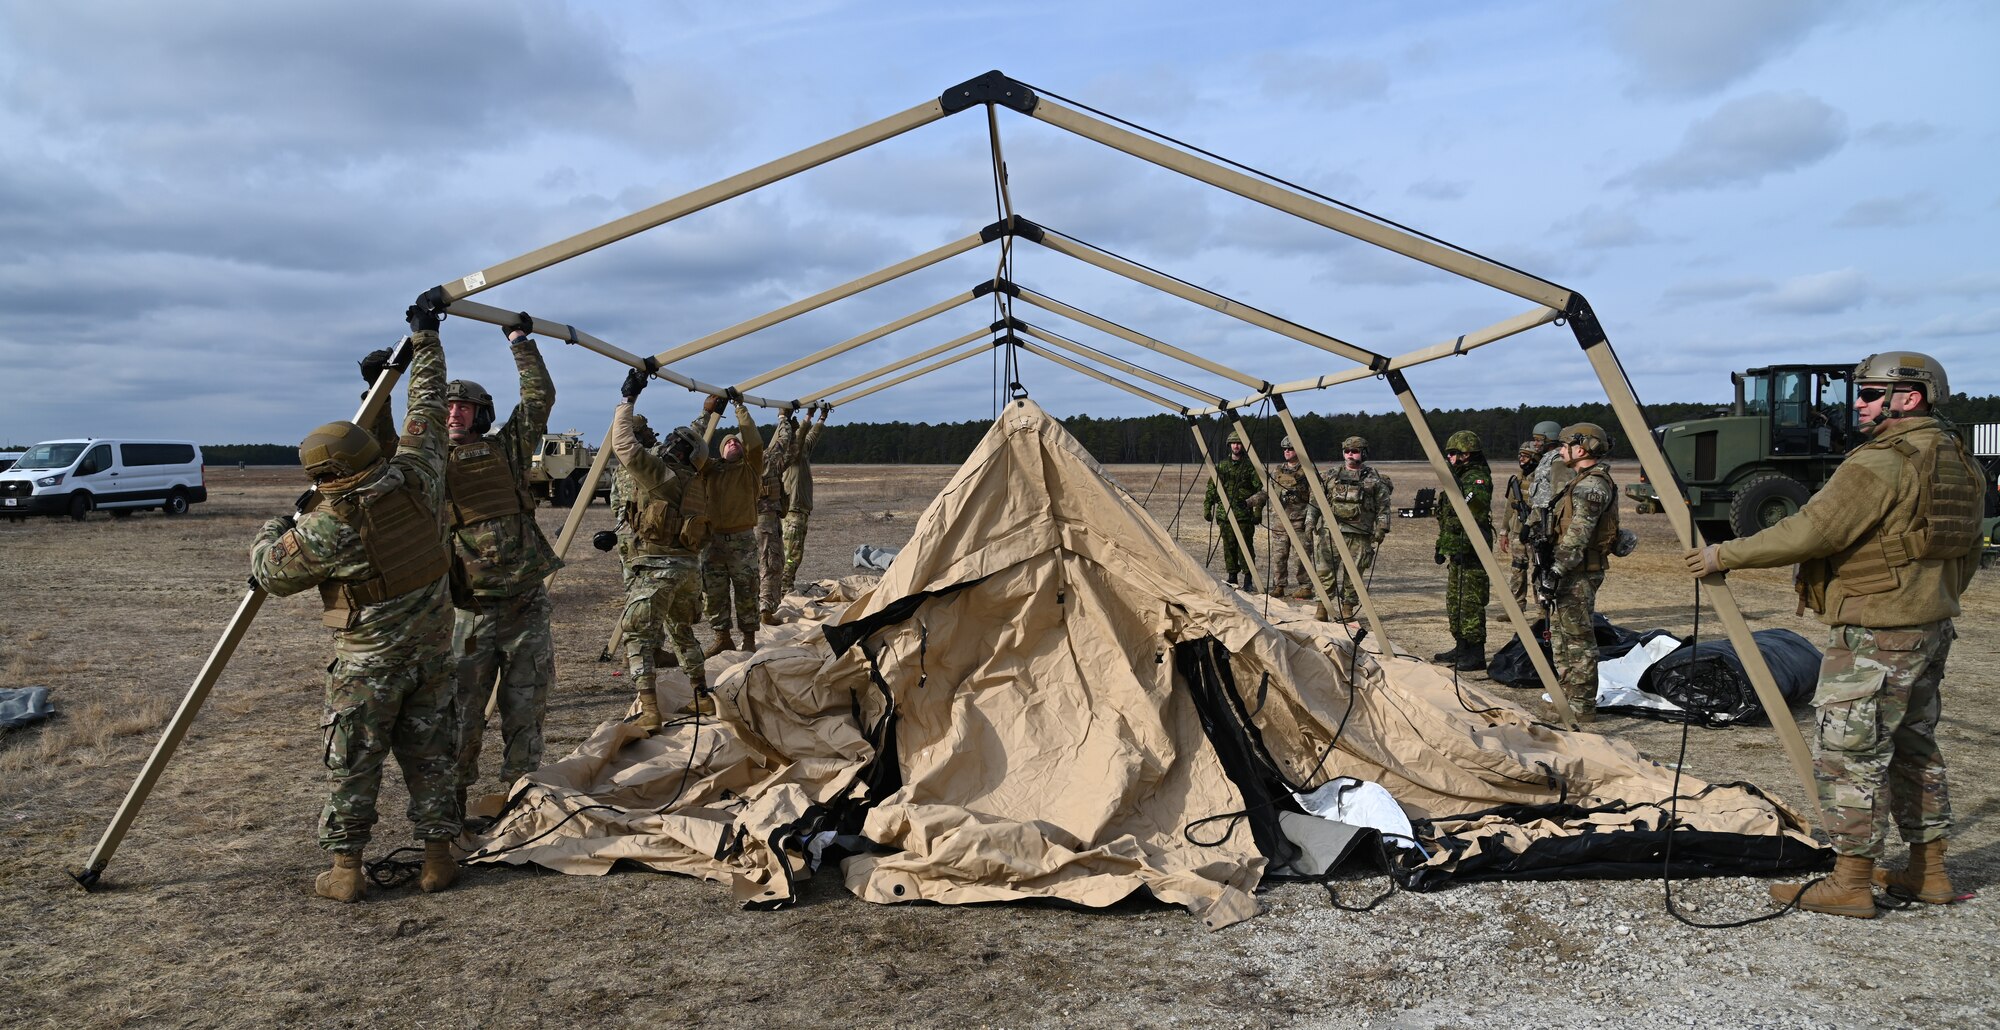 Airmen from the 621st Contingency Response Squadron set up tents with members from the Royal Canadian Air Force during Exercise Jersey Devil on Jan. 11, 2023, at Joint Base McGuire-Dix-Lakehurst, N.J.